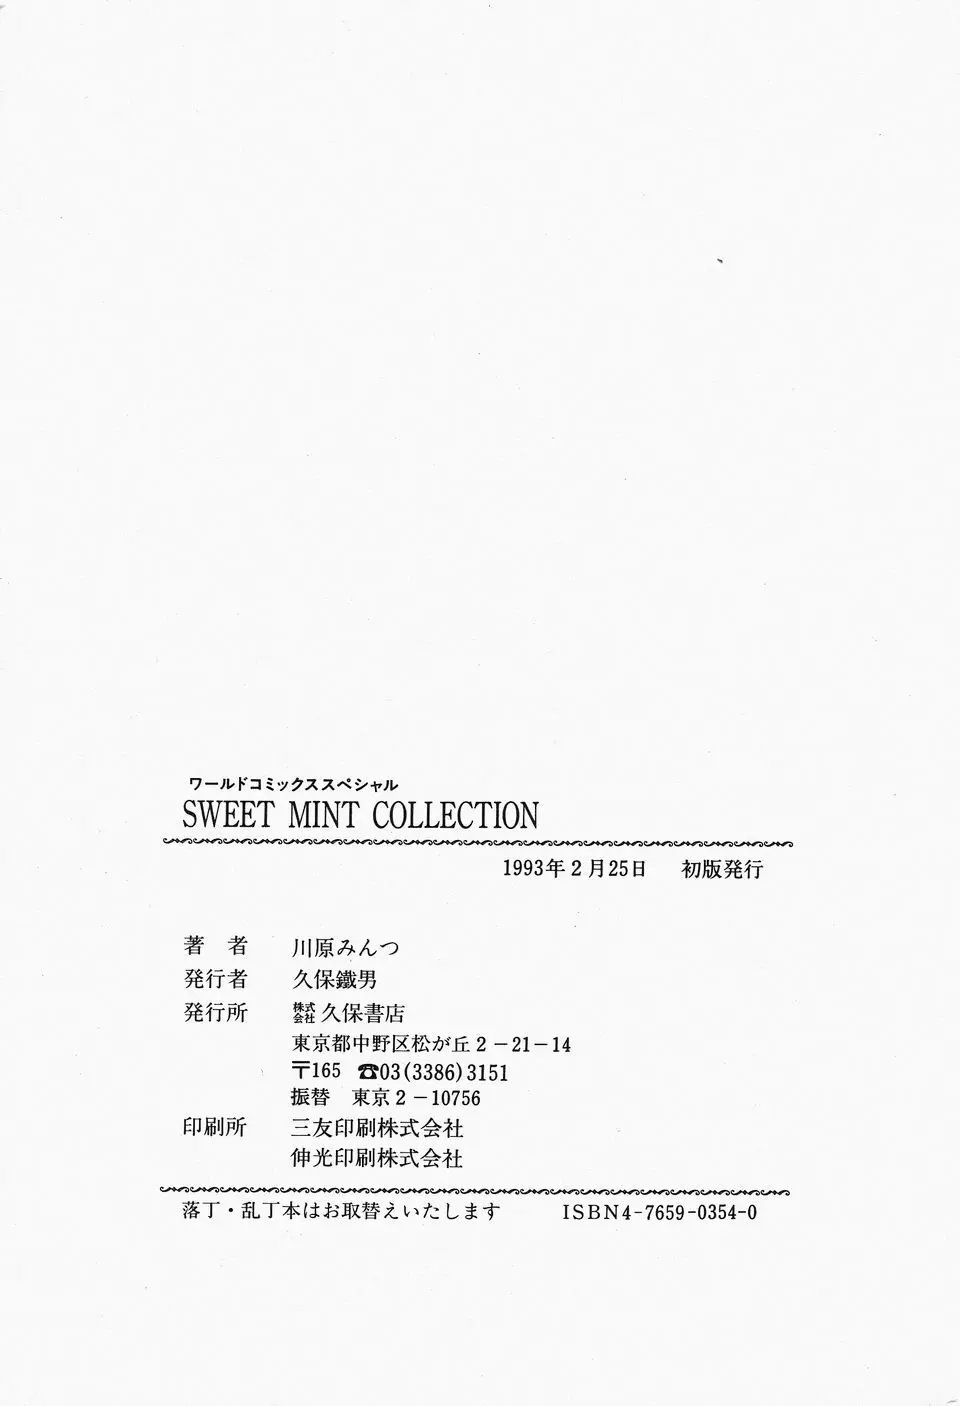 SWEET MINT COLLECTION 167ページ